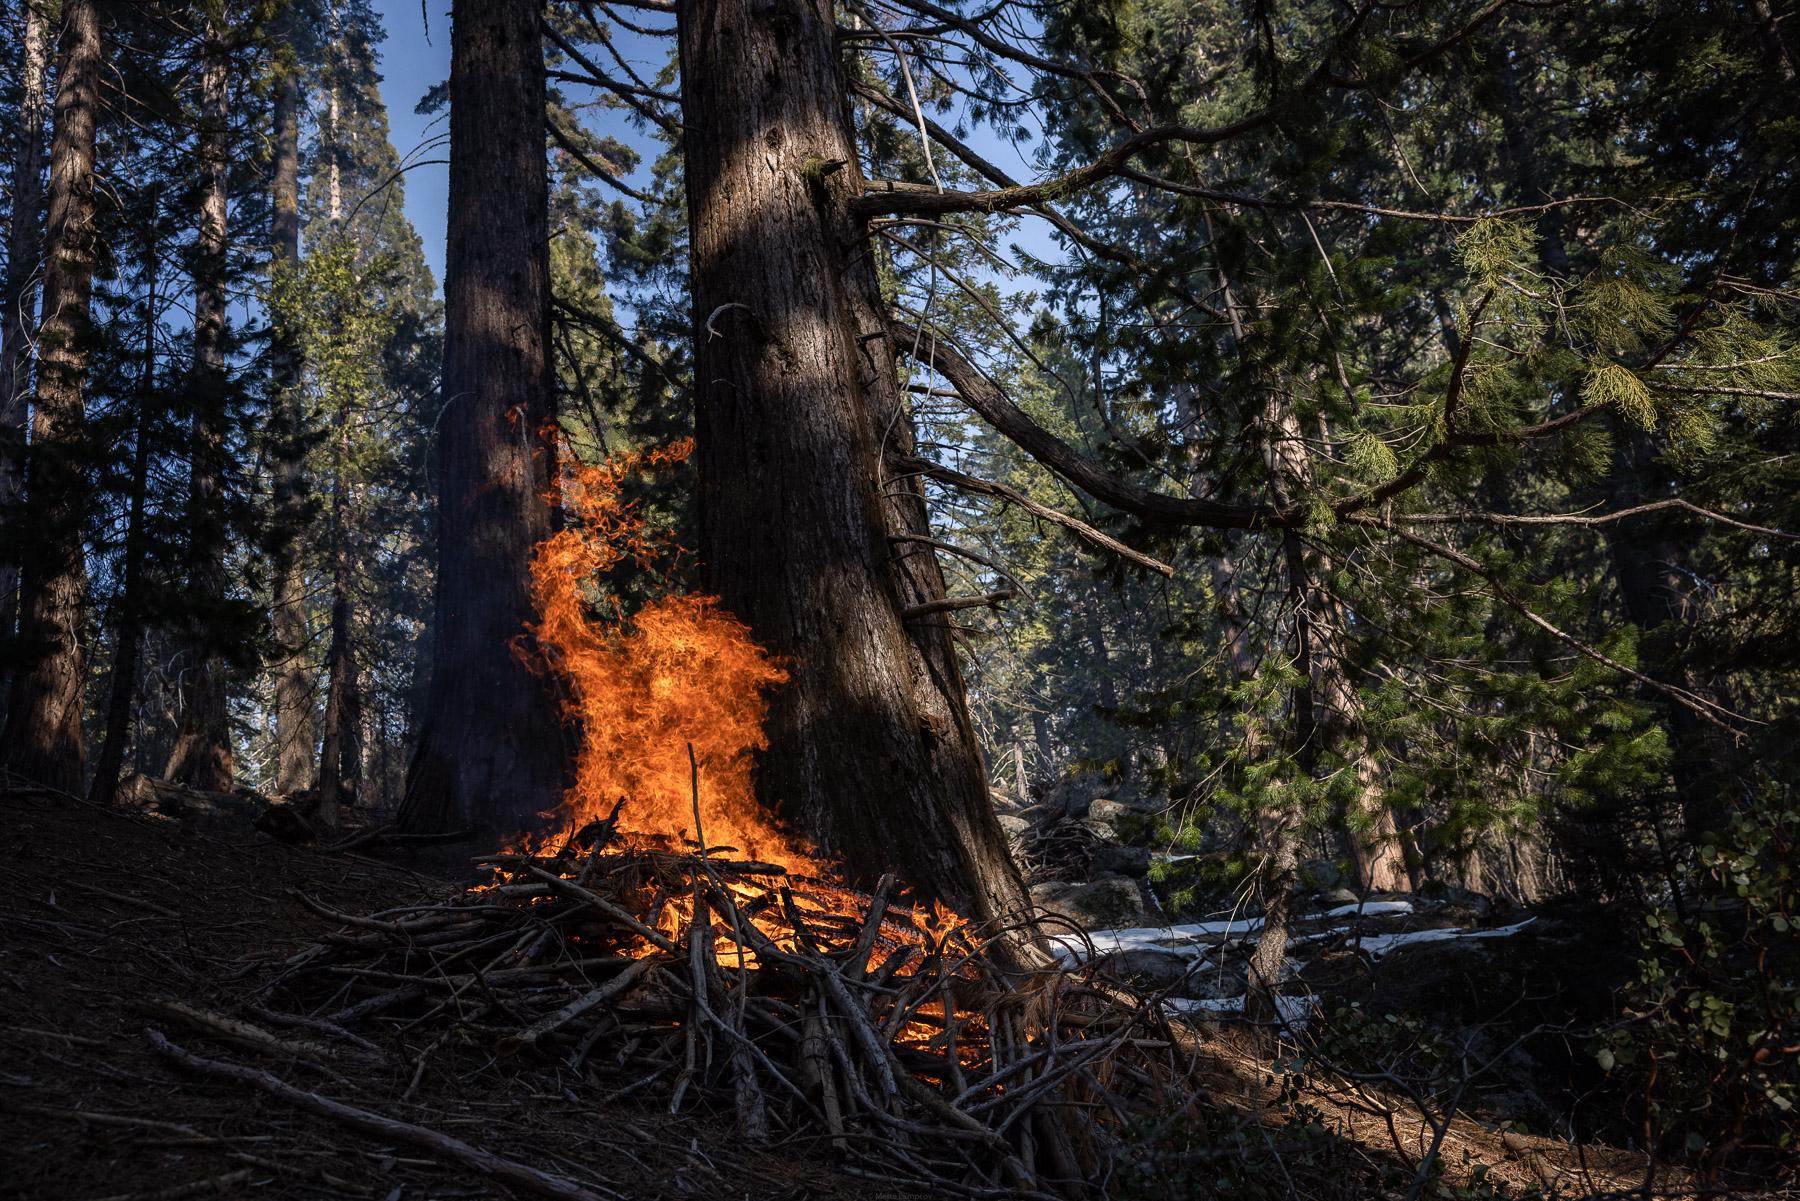 - Sequoia, a year in a burning forest - A pile fire burning.